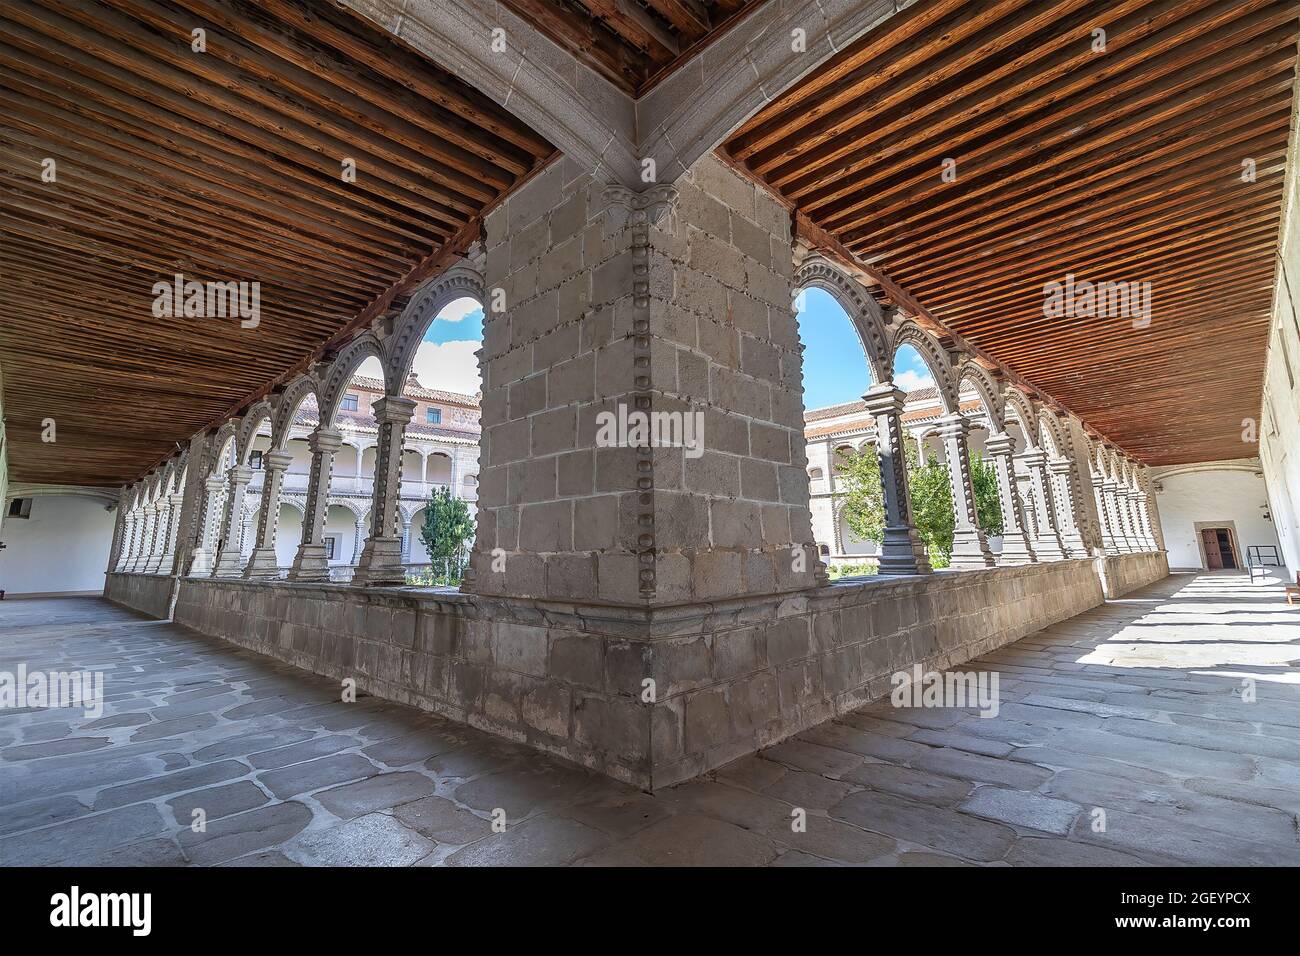 Avila, Spain - September 9, 2017: Court yard of The burial place of Don Juan, son of Reyes Catolicos, Fernando and Isabel, inside The Royal Monastery Stock Photo